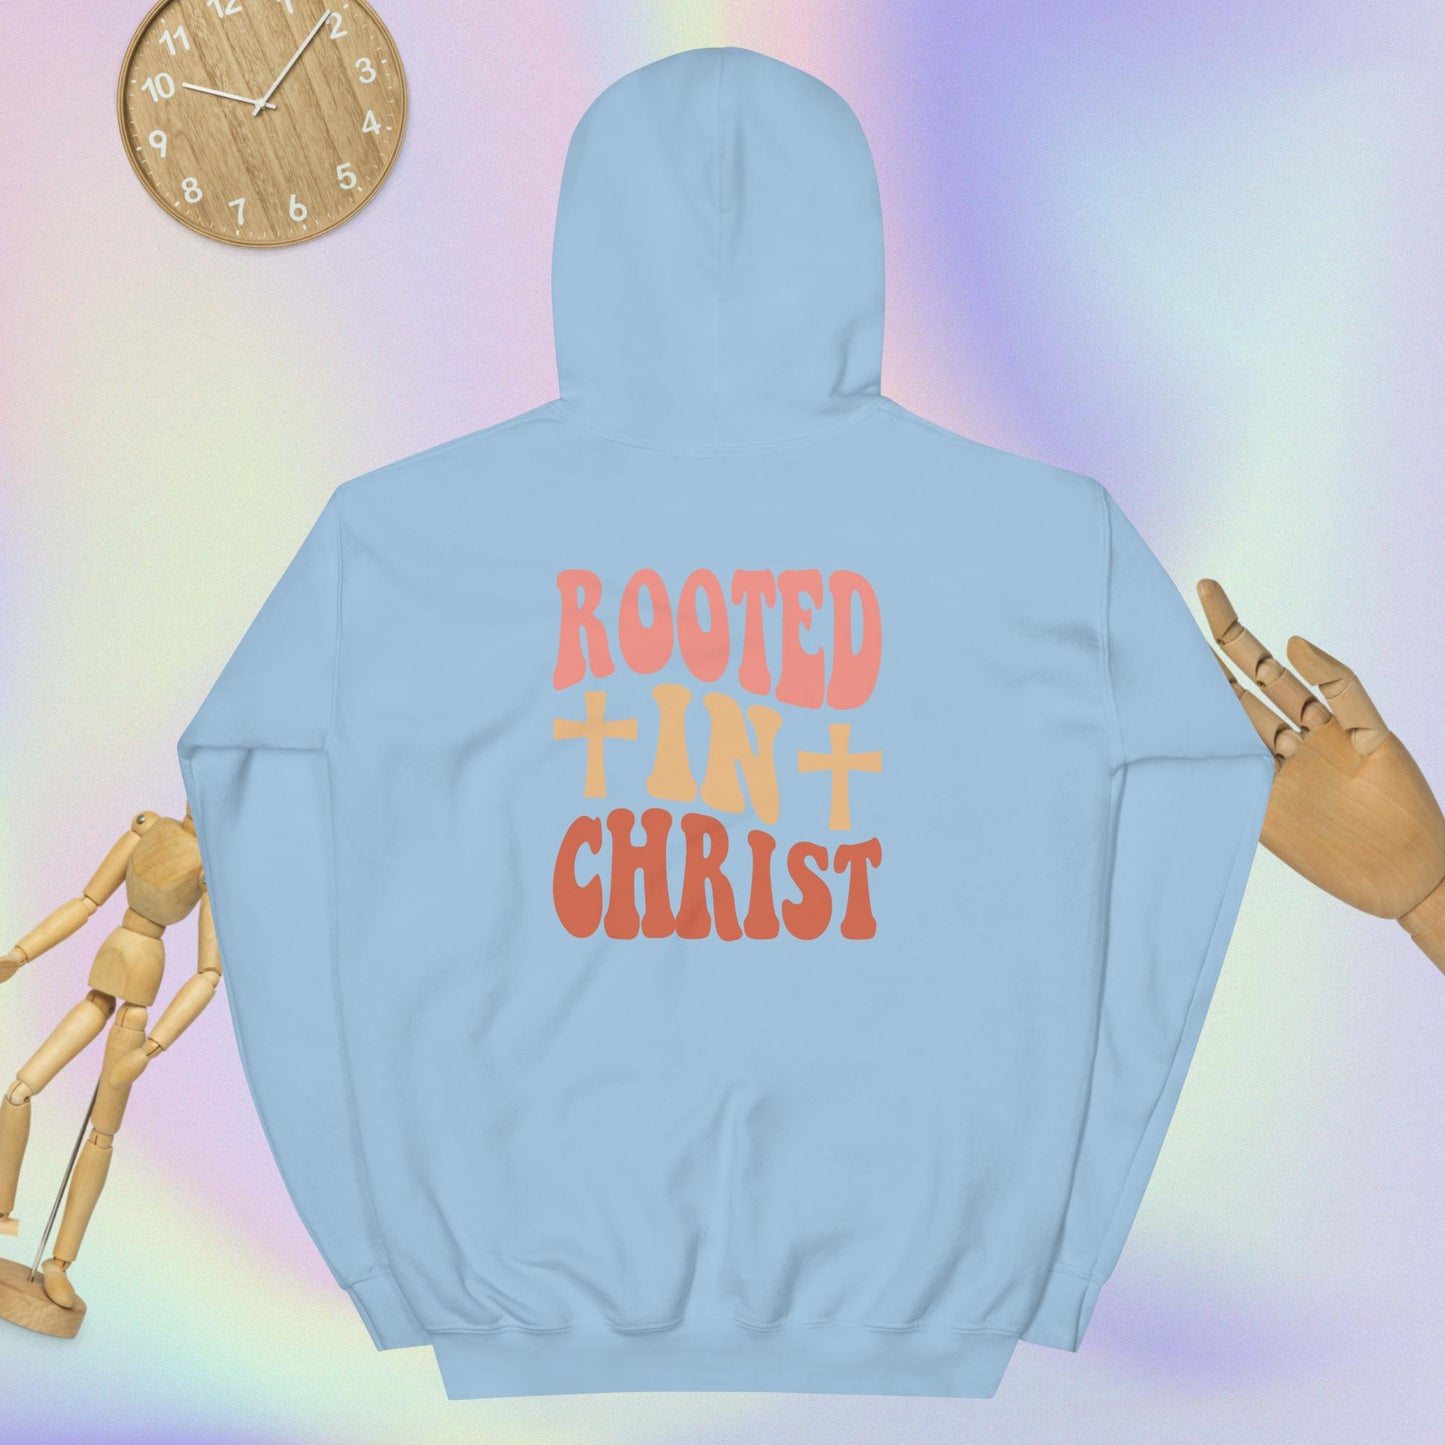 "Rooted In Christ" Hoodie